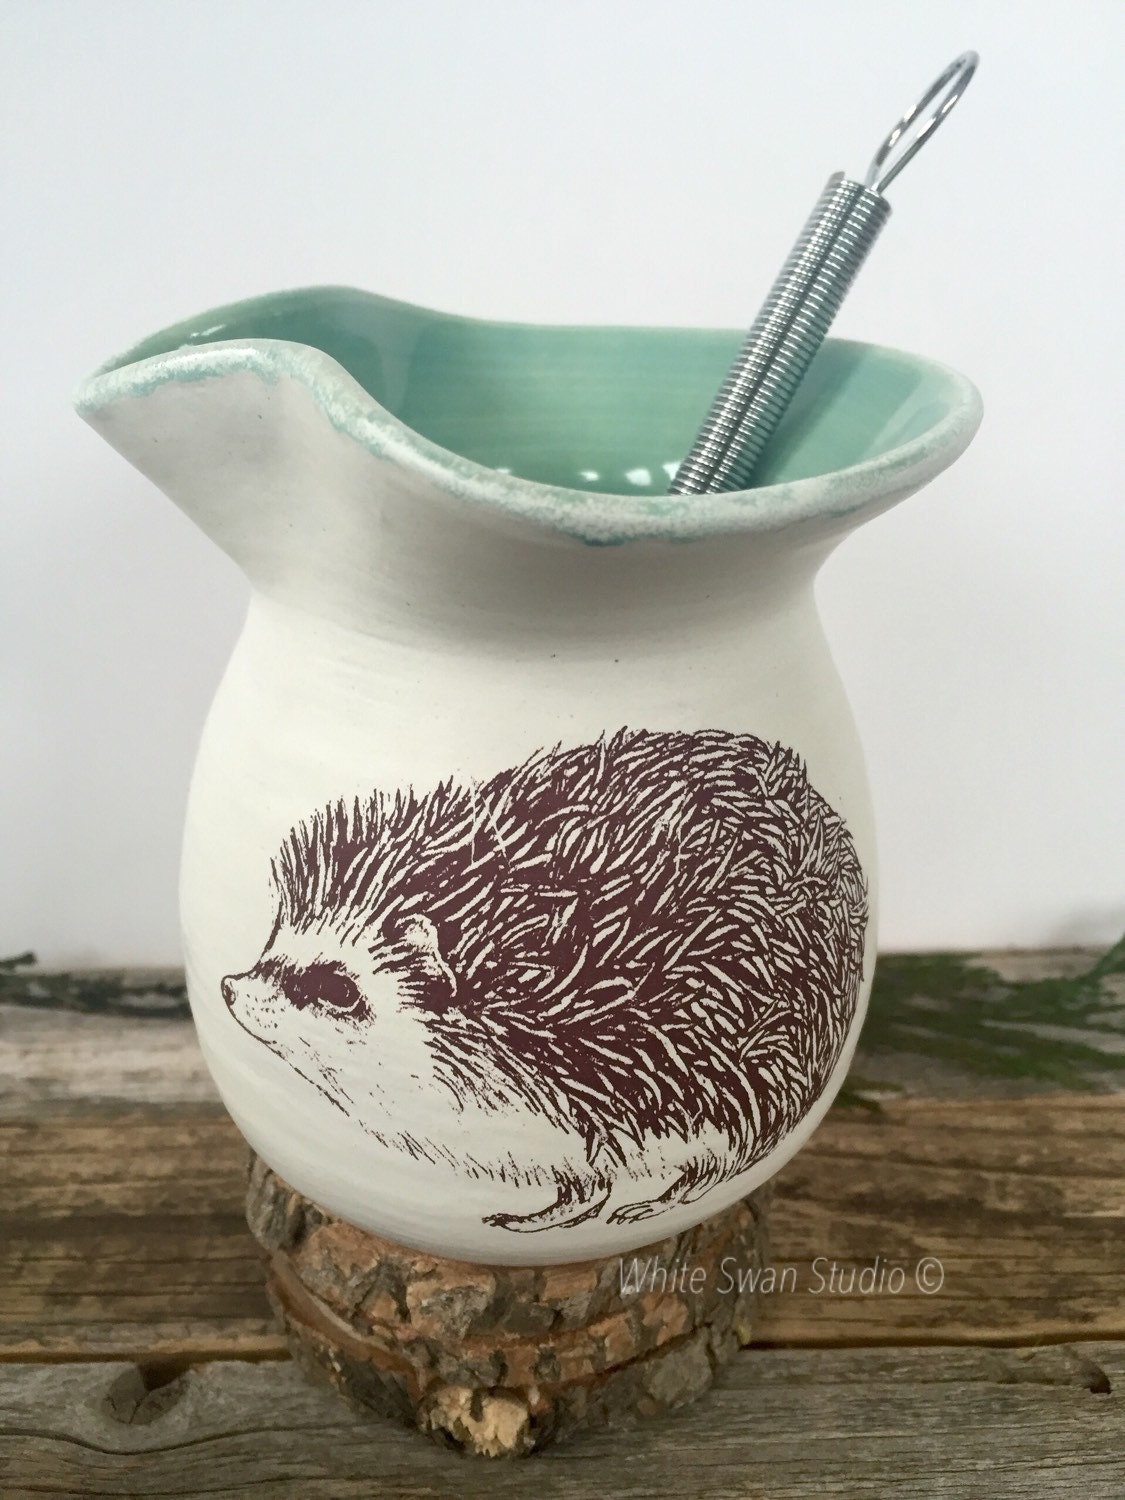 Hedgehog Snack Containers, set of 2 - Whisk